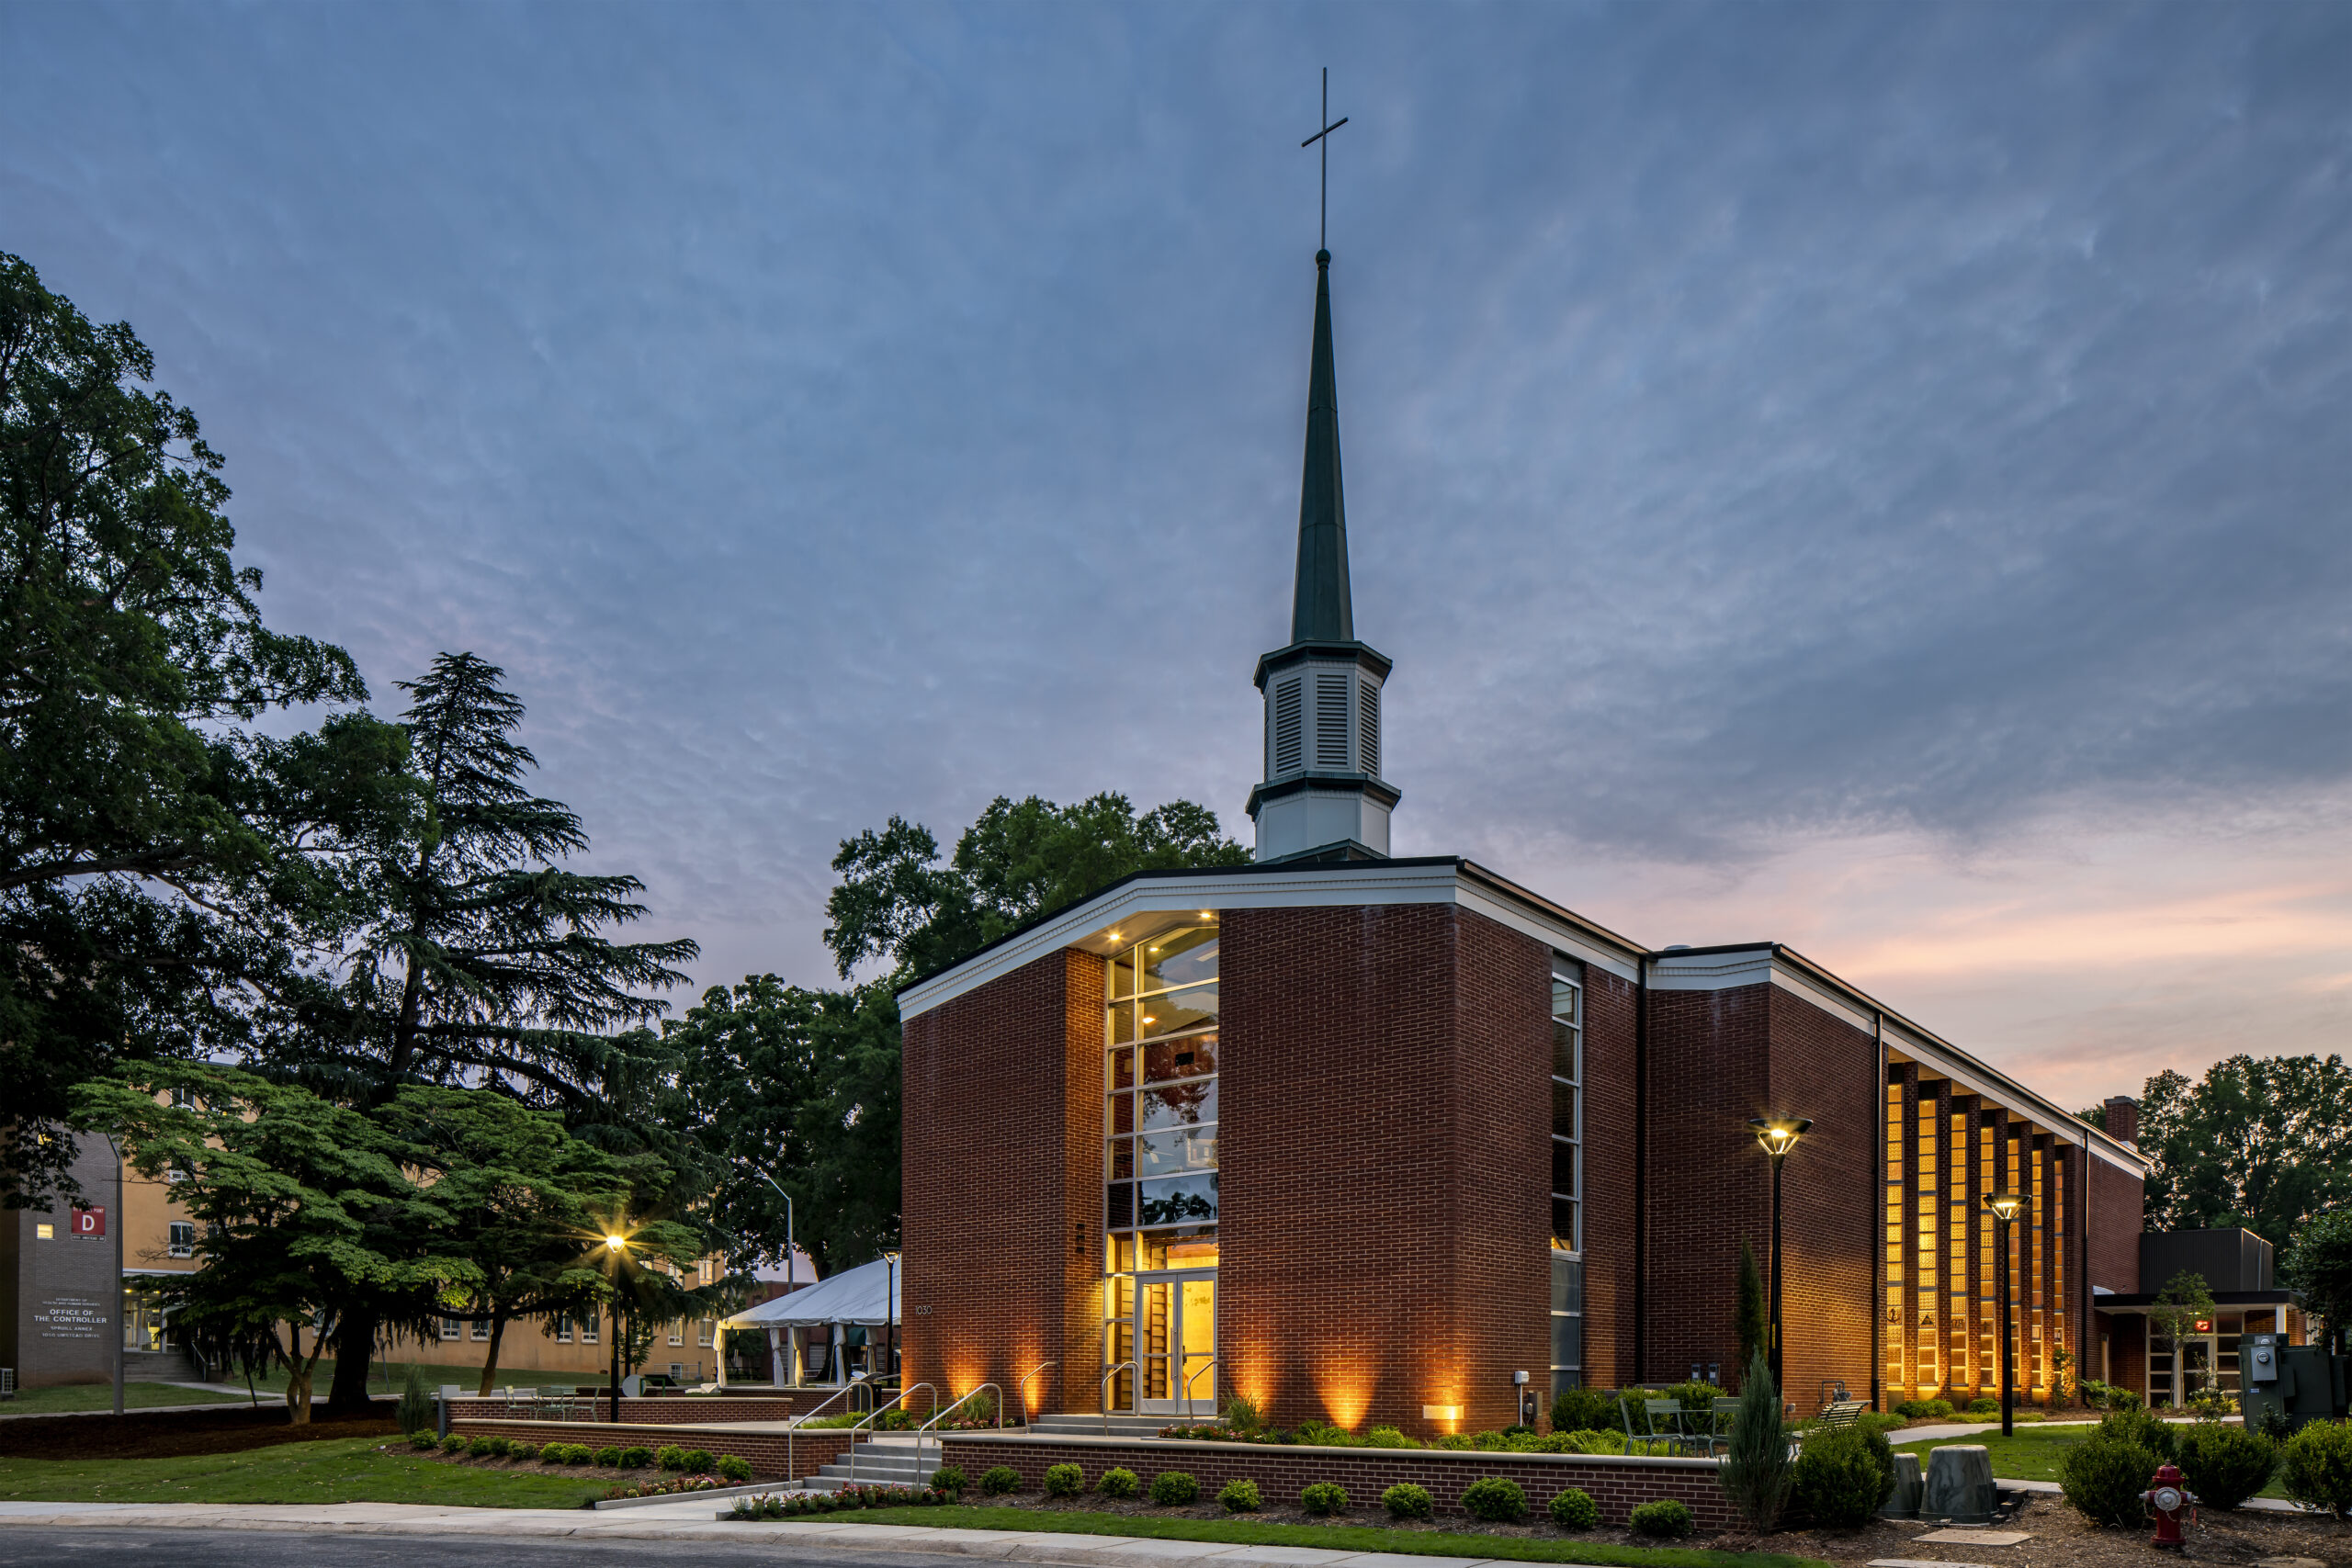 Greg Poole, Jr. All Faiths Chapel Front Exterior Side View at Dusk with Lights